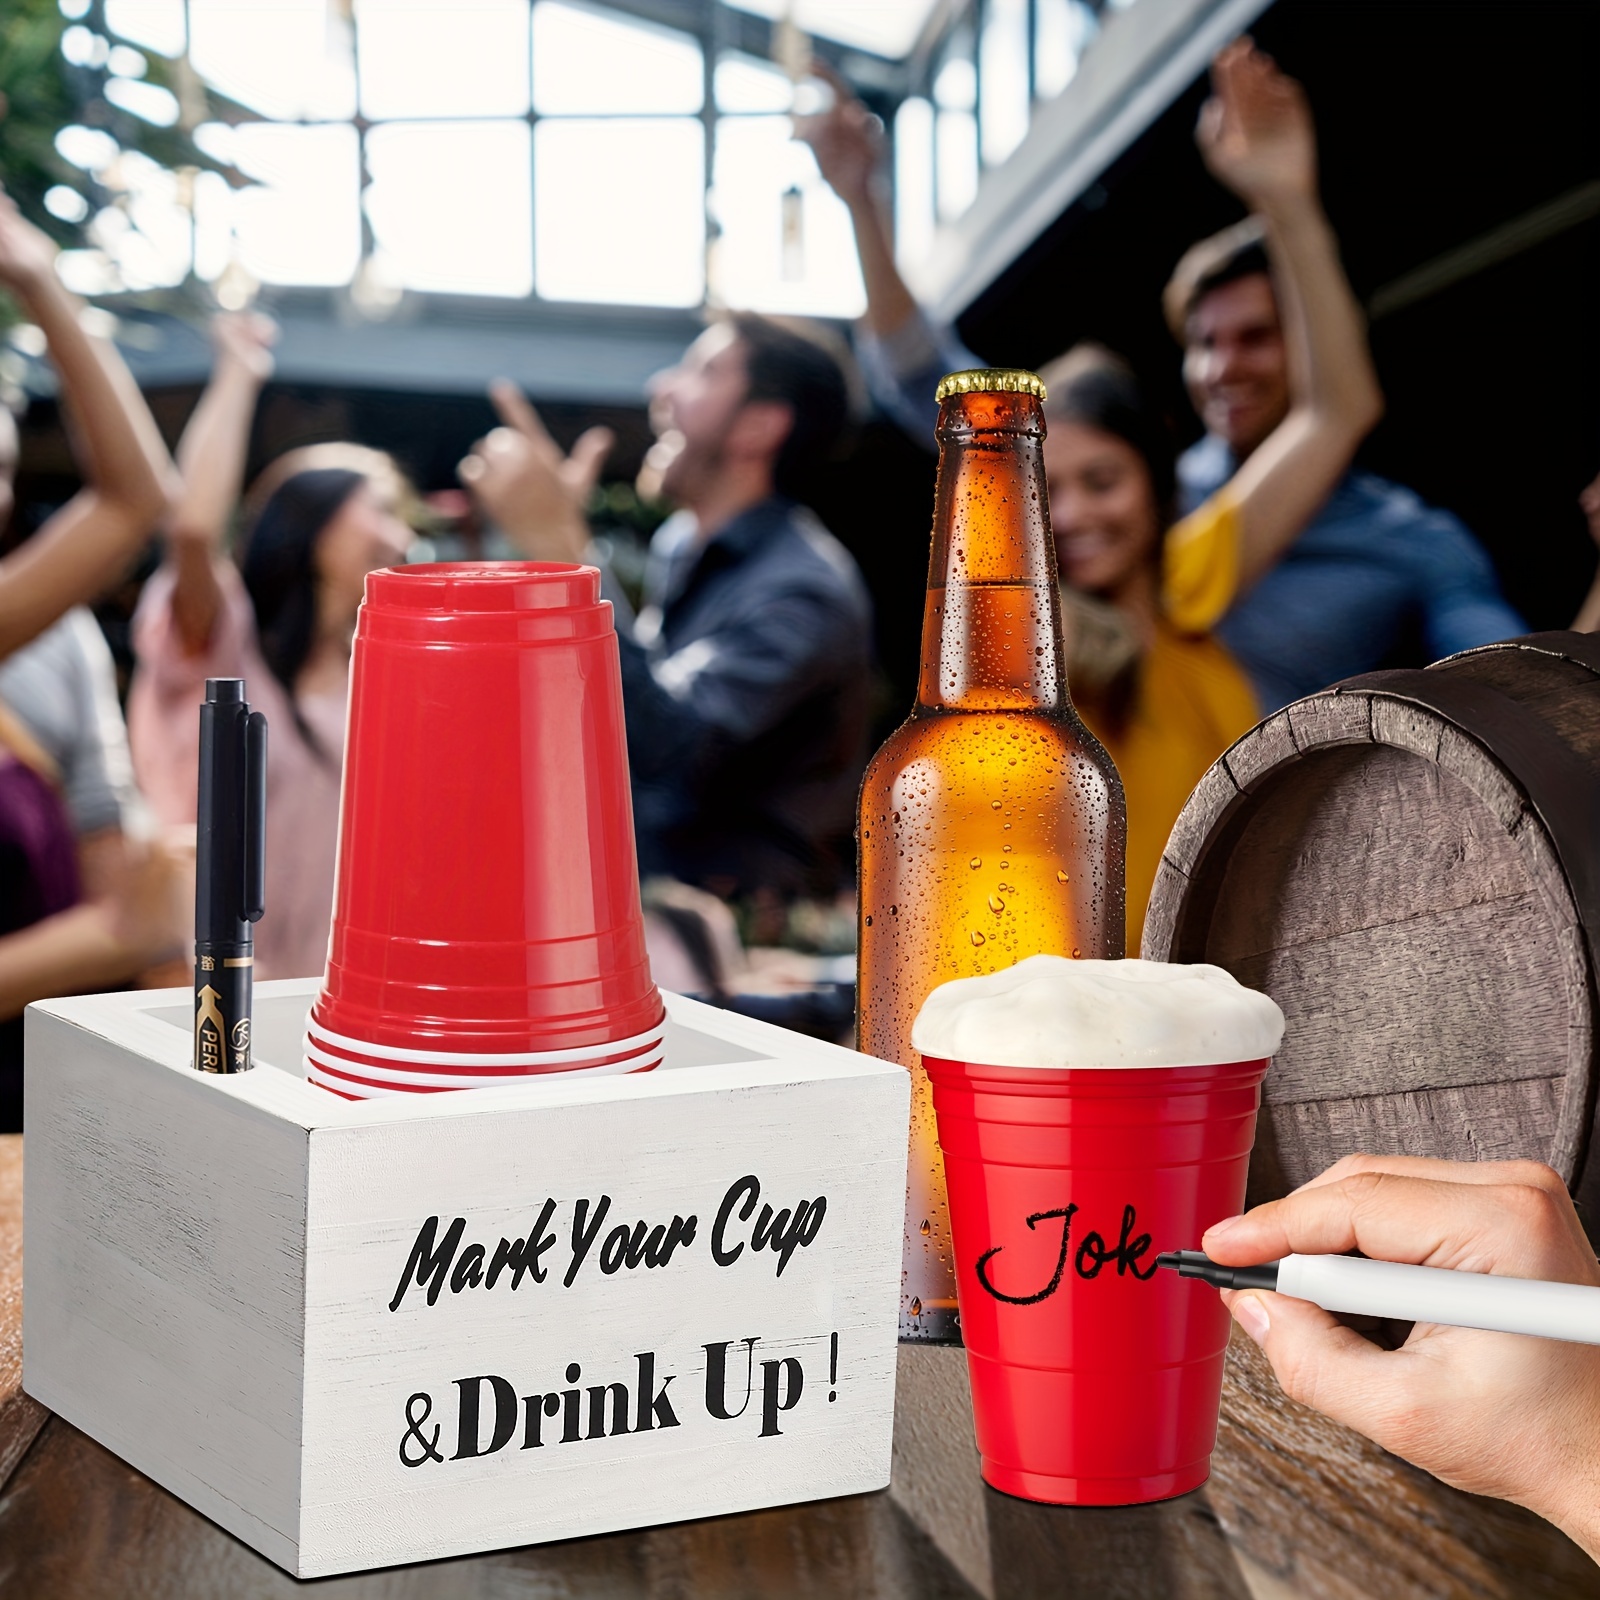  Double Solo Cup Holder with Marker Slot Wooden Mark Your Cup  and Drink Up 2 Sides Designs Drink Dispensers for Parties Farmhouse Bar  Christmas Housewarming Party Holiday Decor Hostess Gifts 